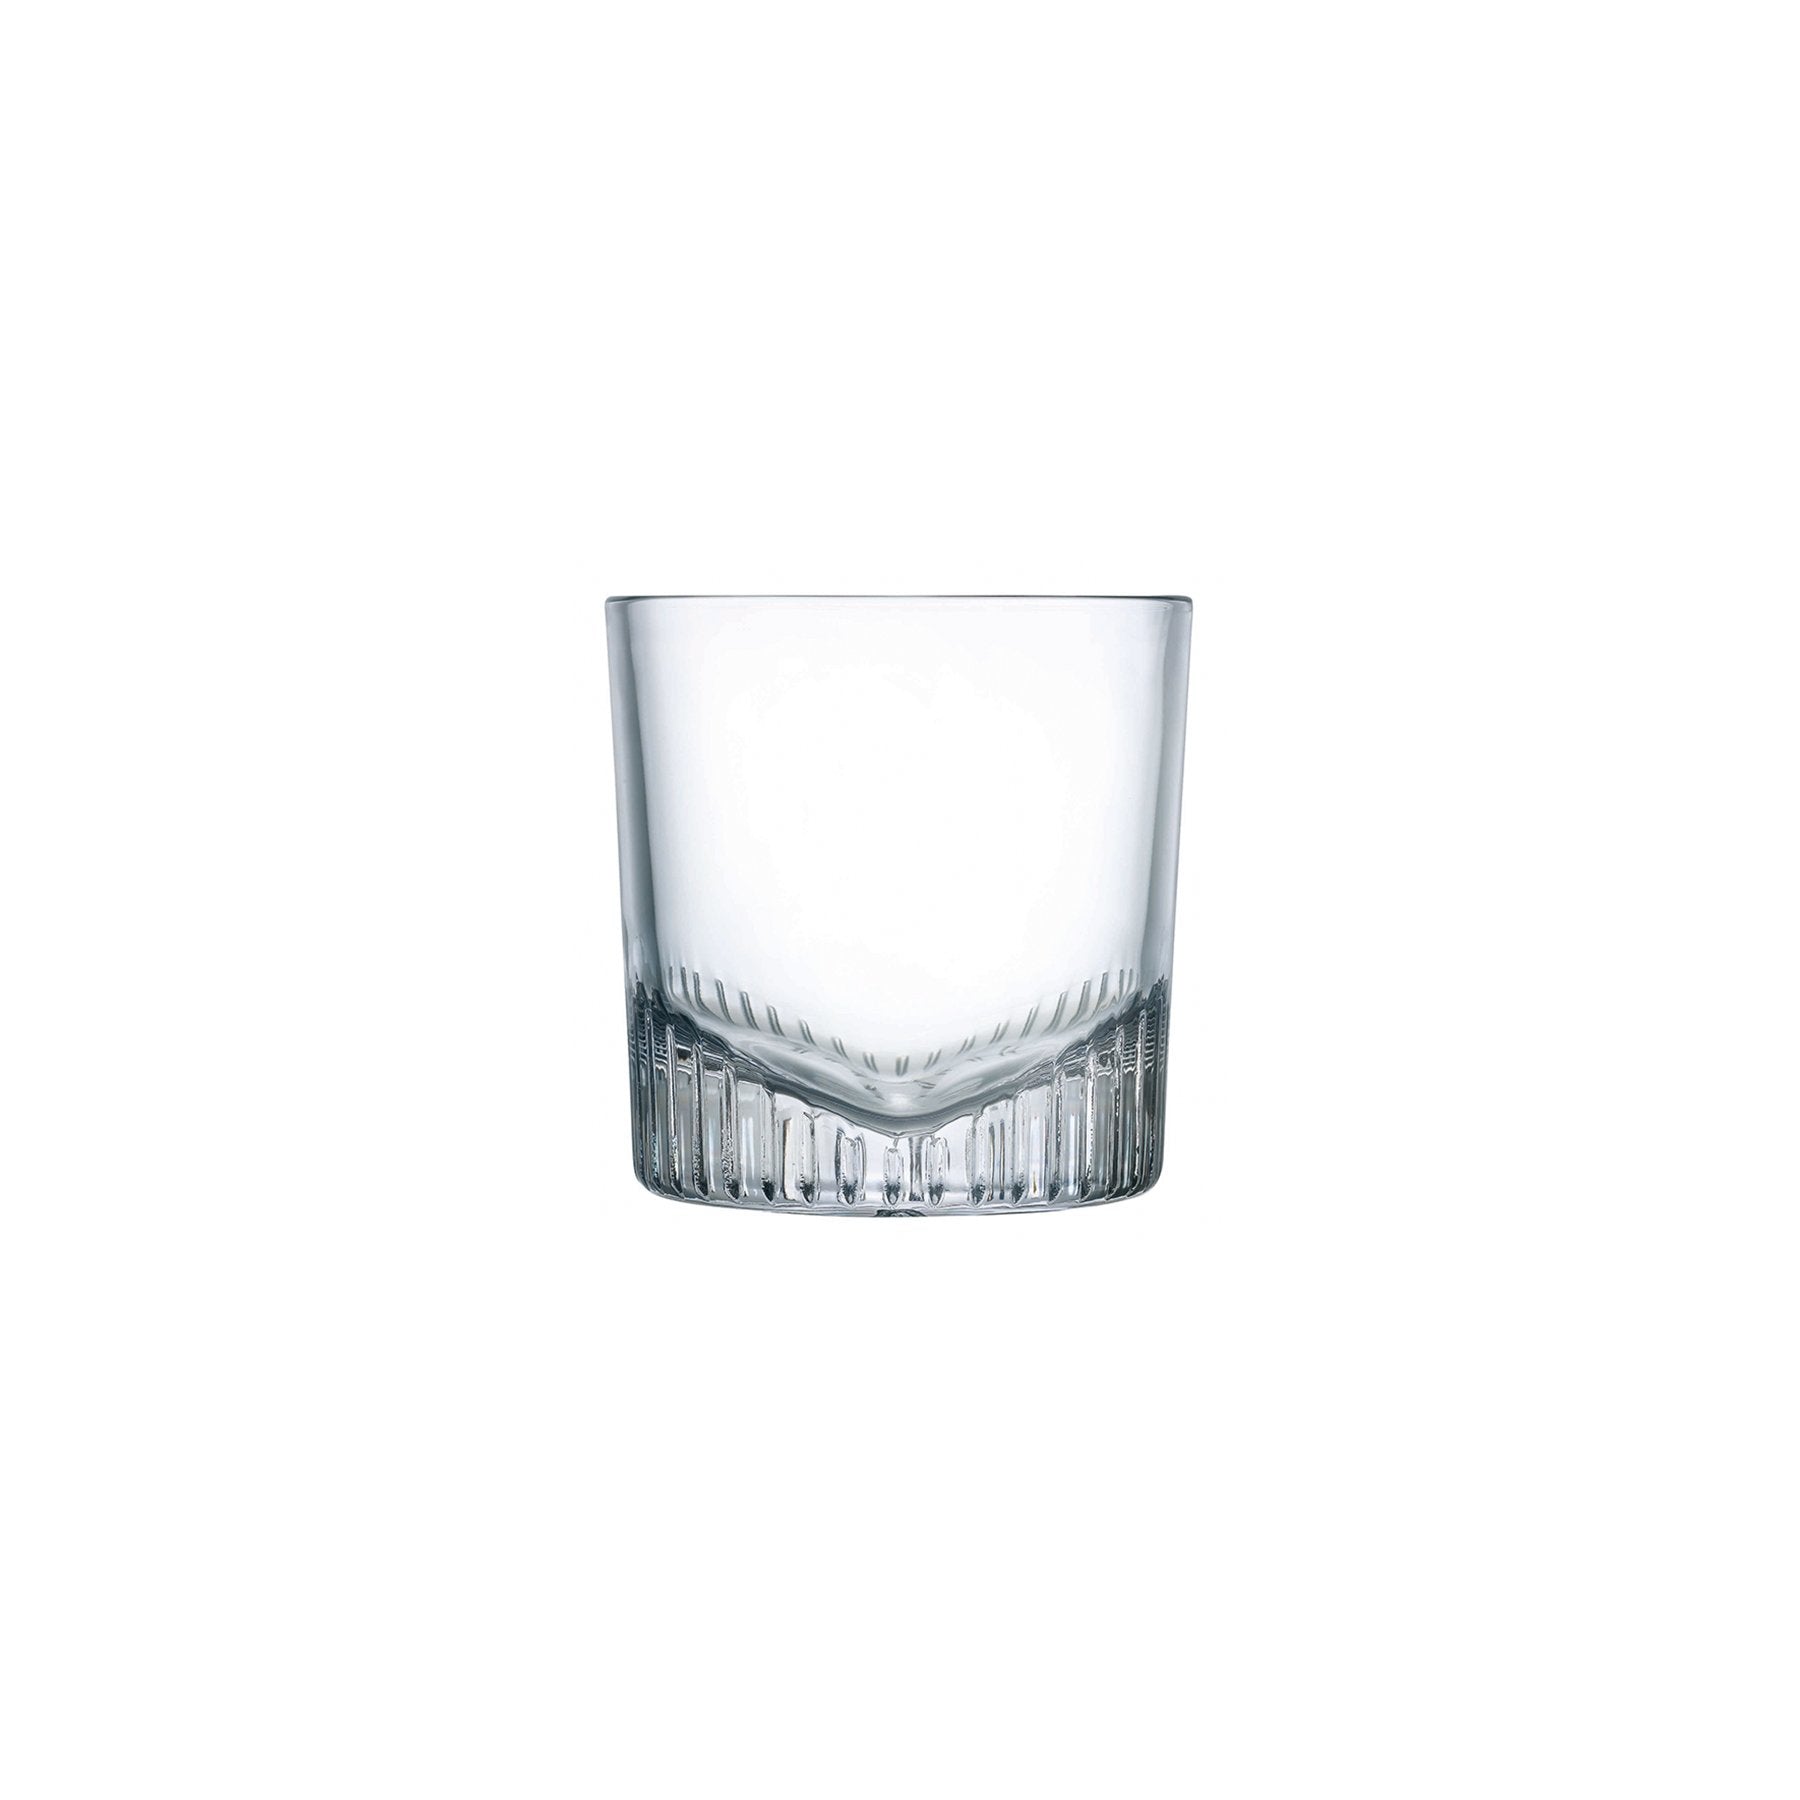 caldera set of 4 whisky glasses 11 oz by nude at adorn.house